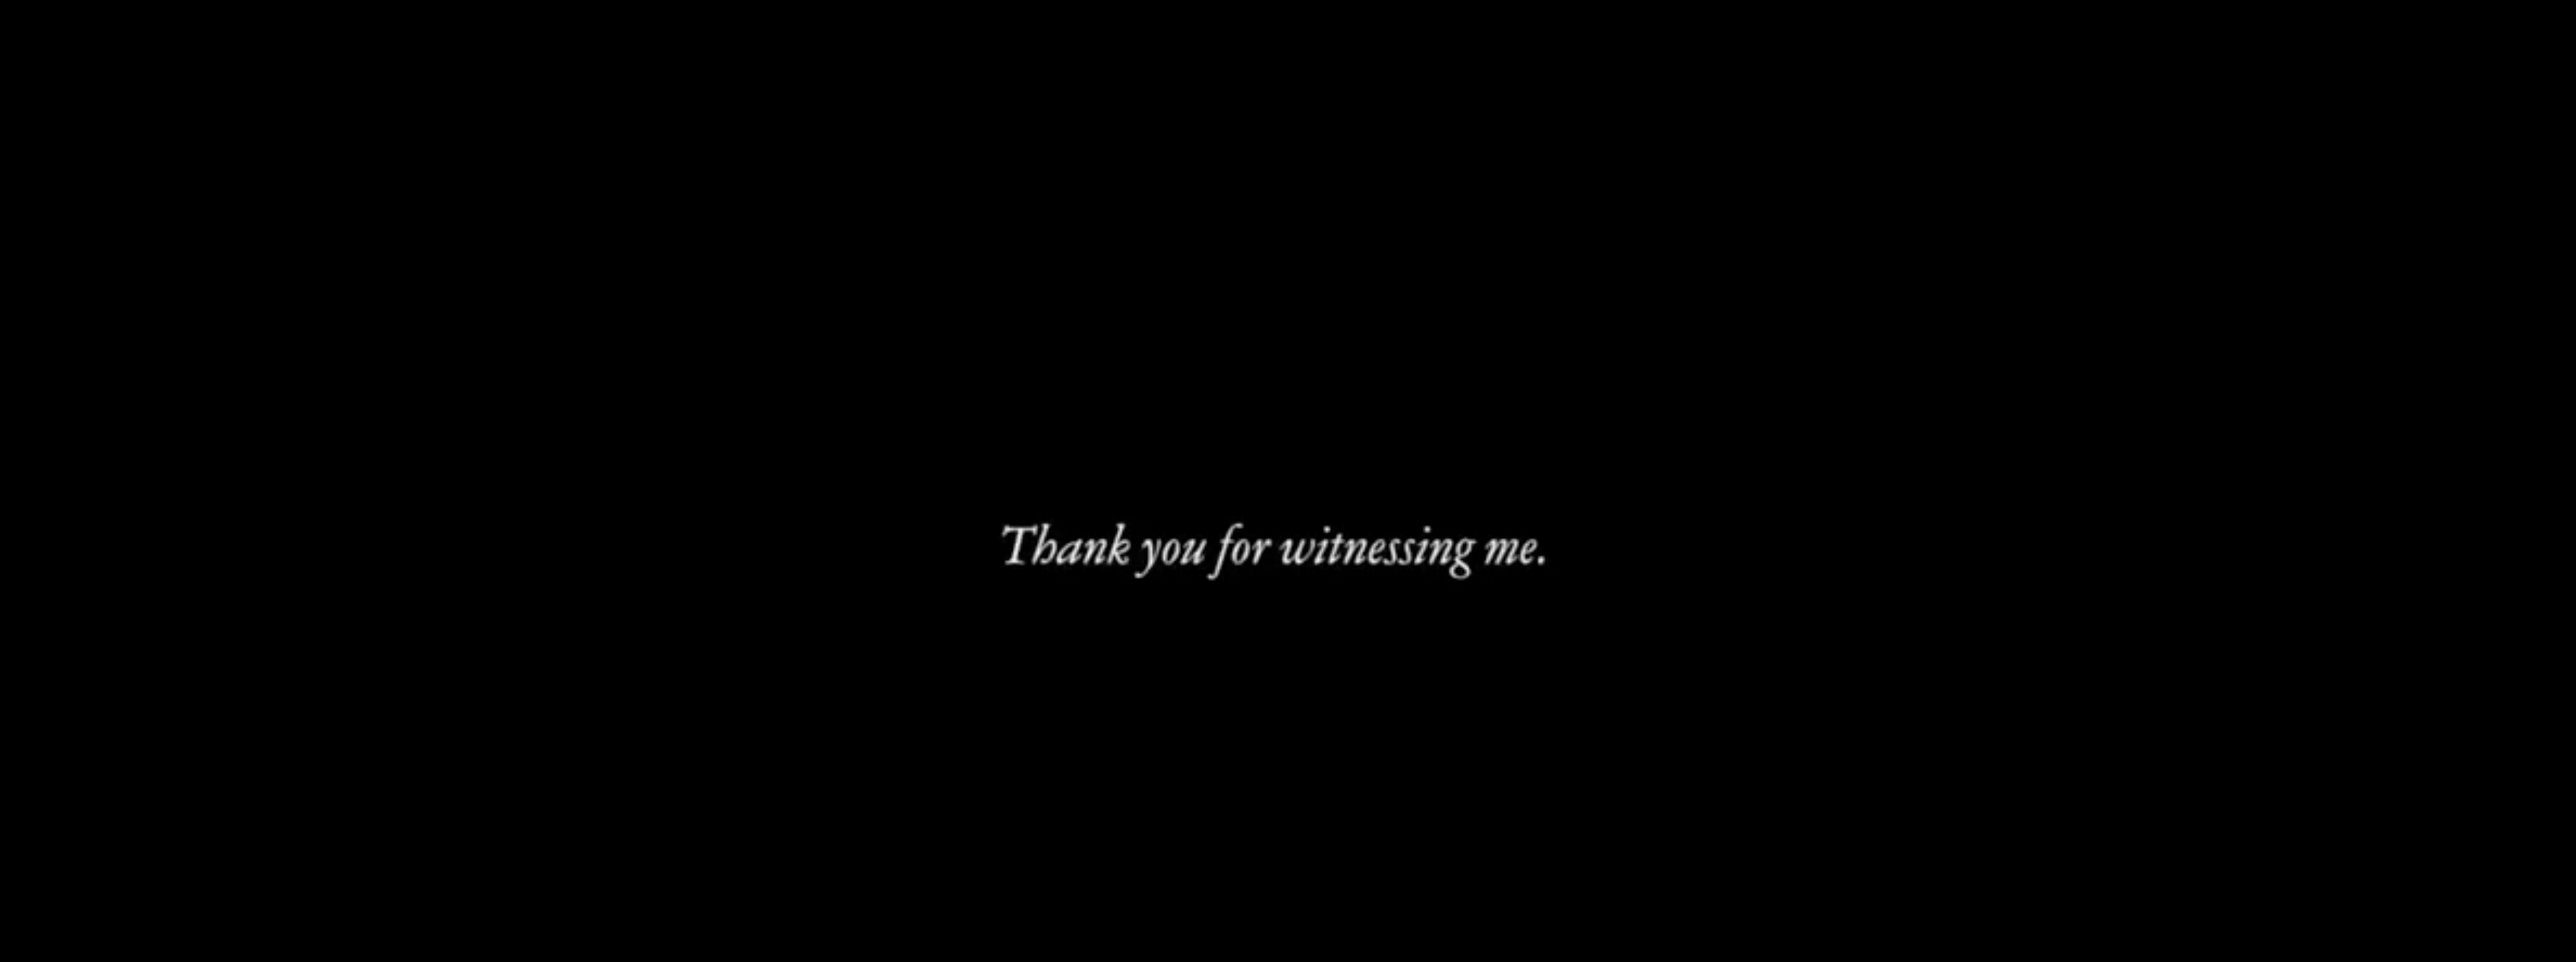 Load video: Thank you for witnessing me